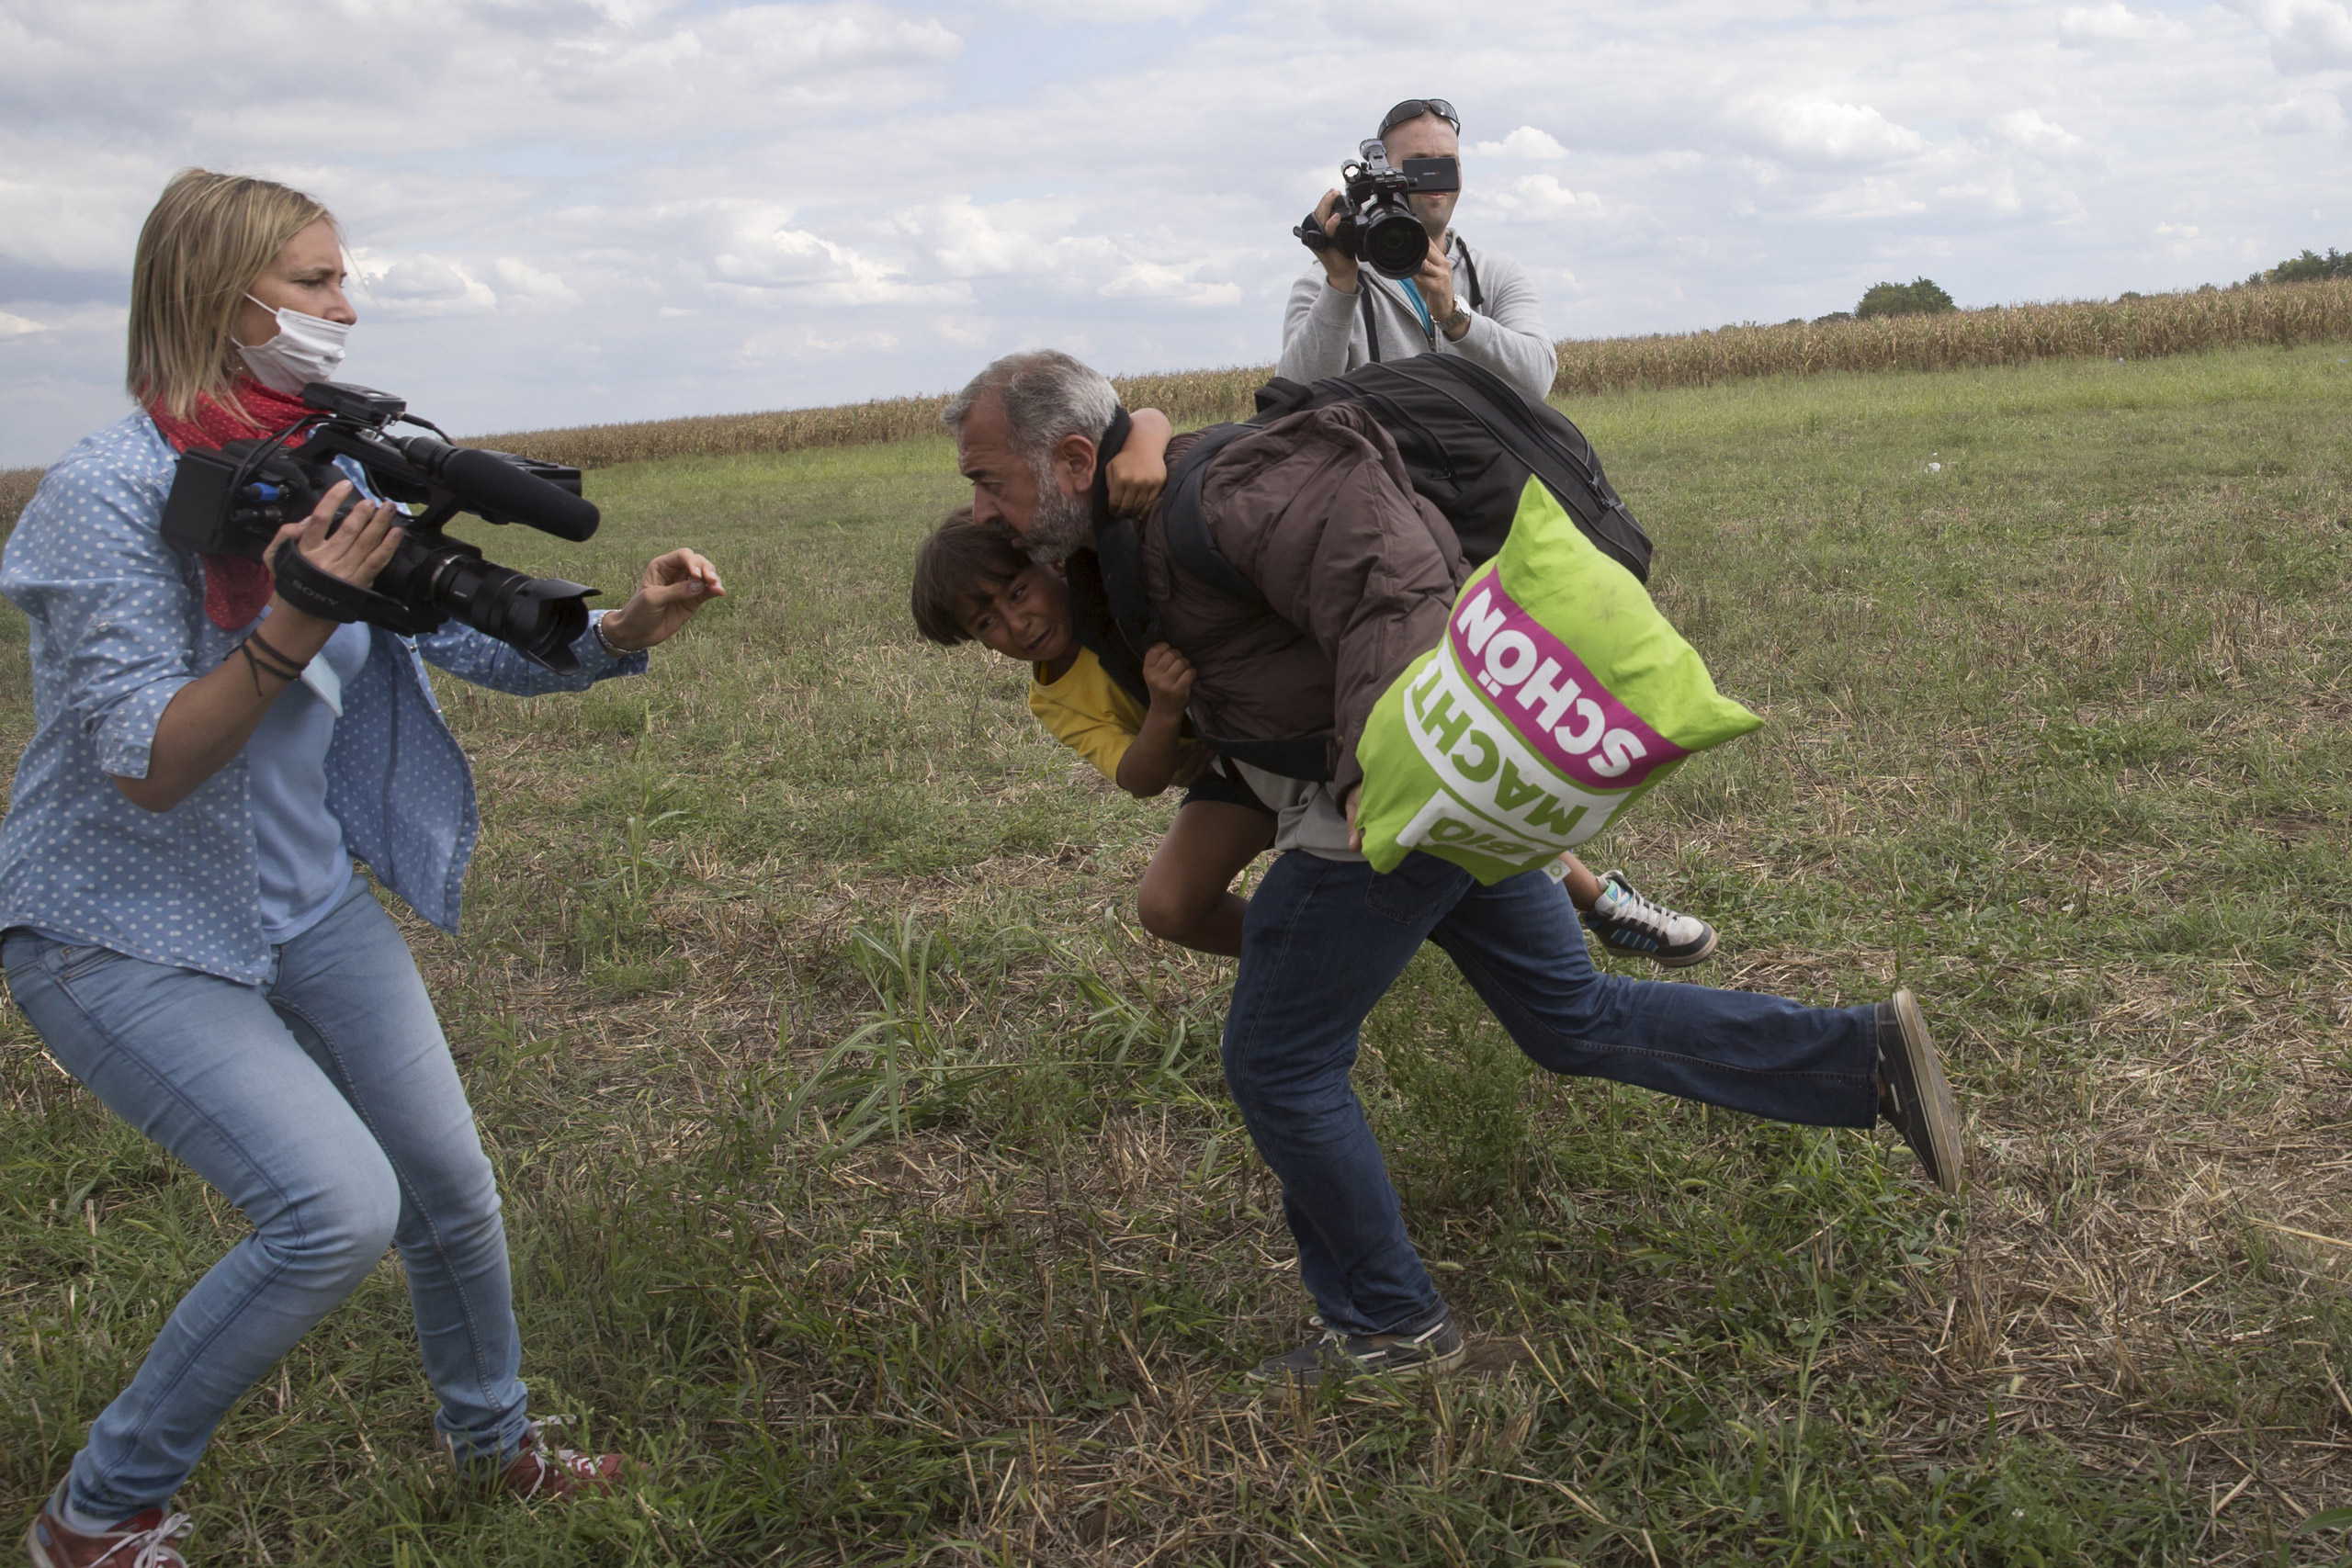 A migrant runs with a child before tripping and falling on TV camerawoman Laszlo as he tries to escape from a collection point in Roszke village, Hungary